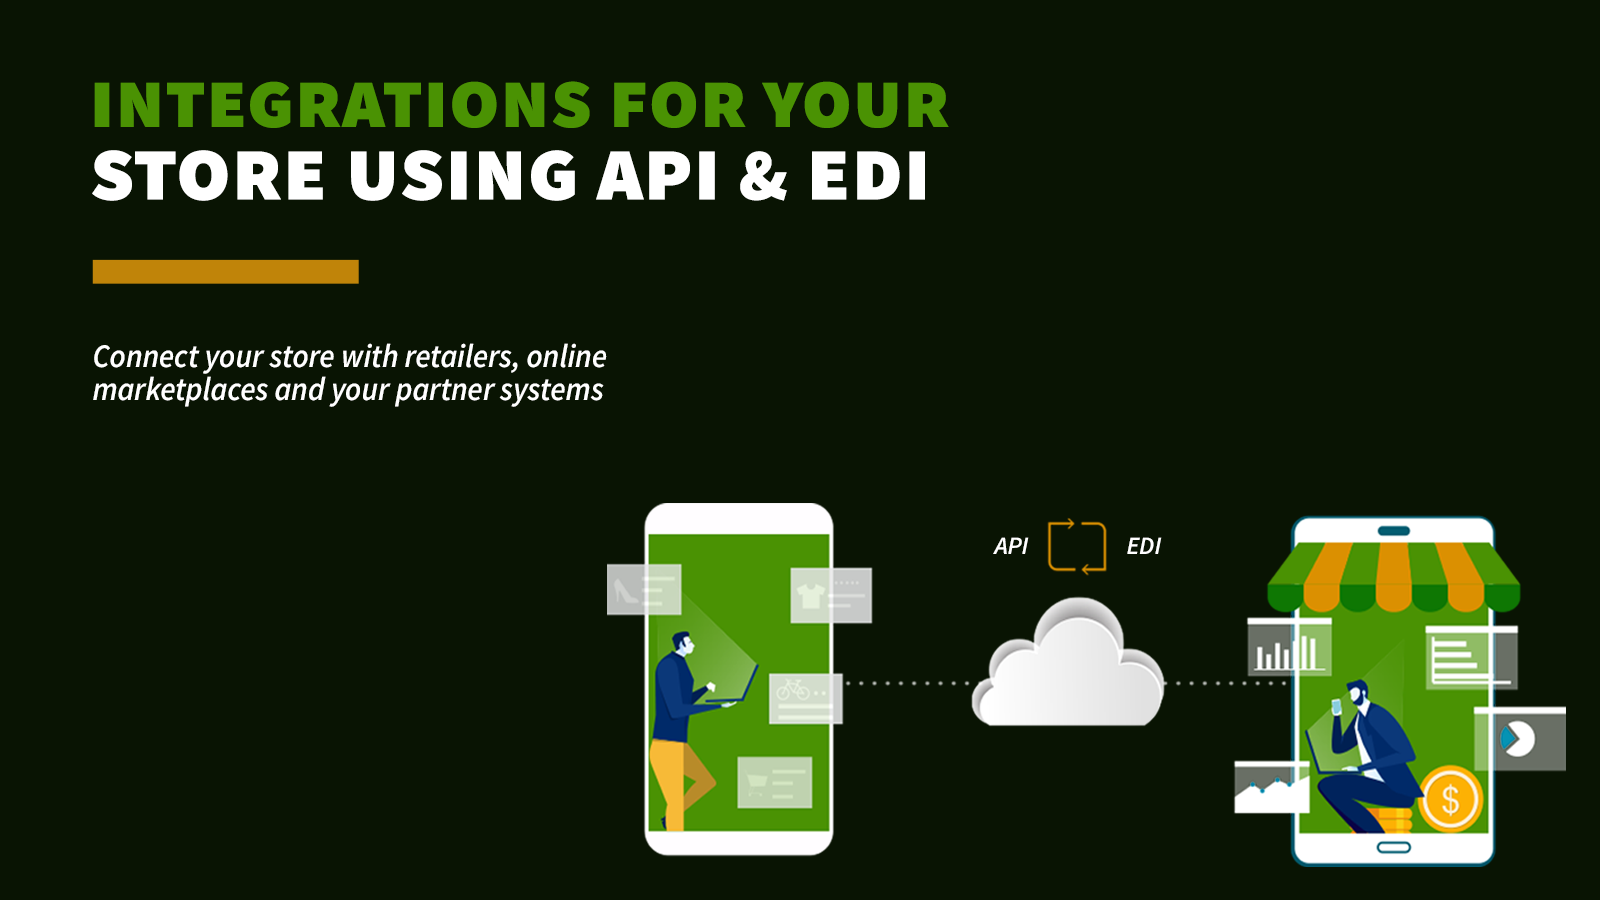 Integration for your store using API and EDI